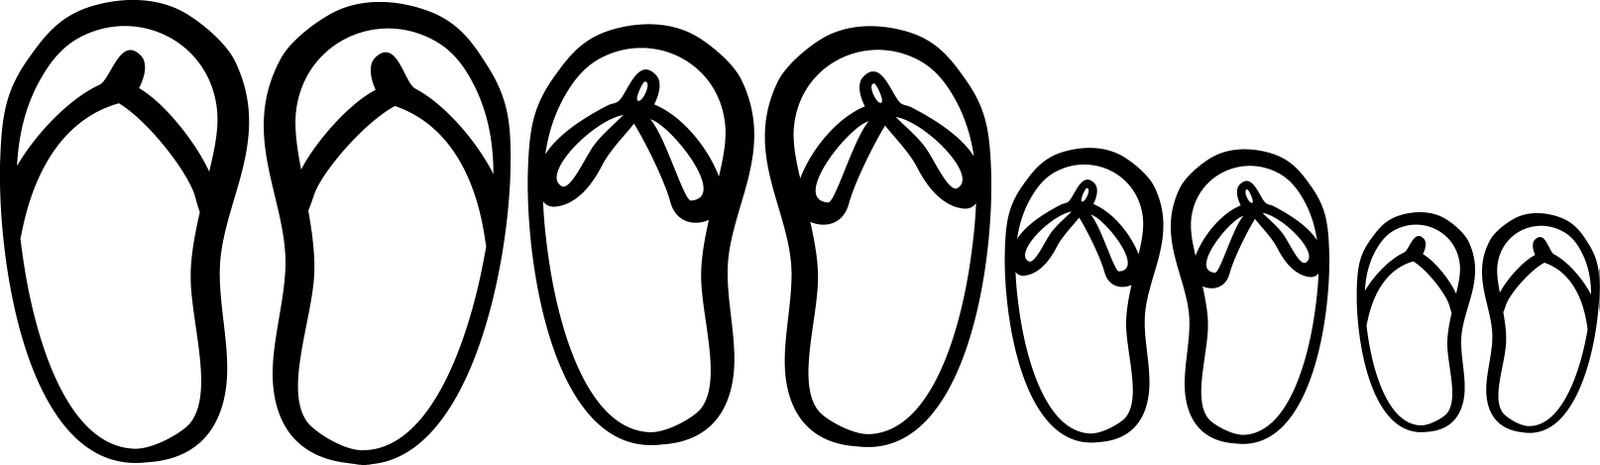 Flip Flop Clip Art Black And White | Clipart library - Free Clipart 